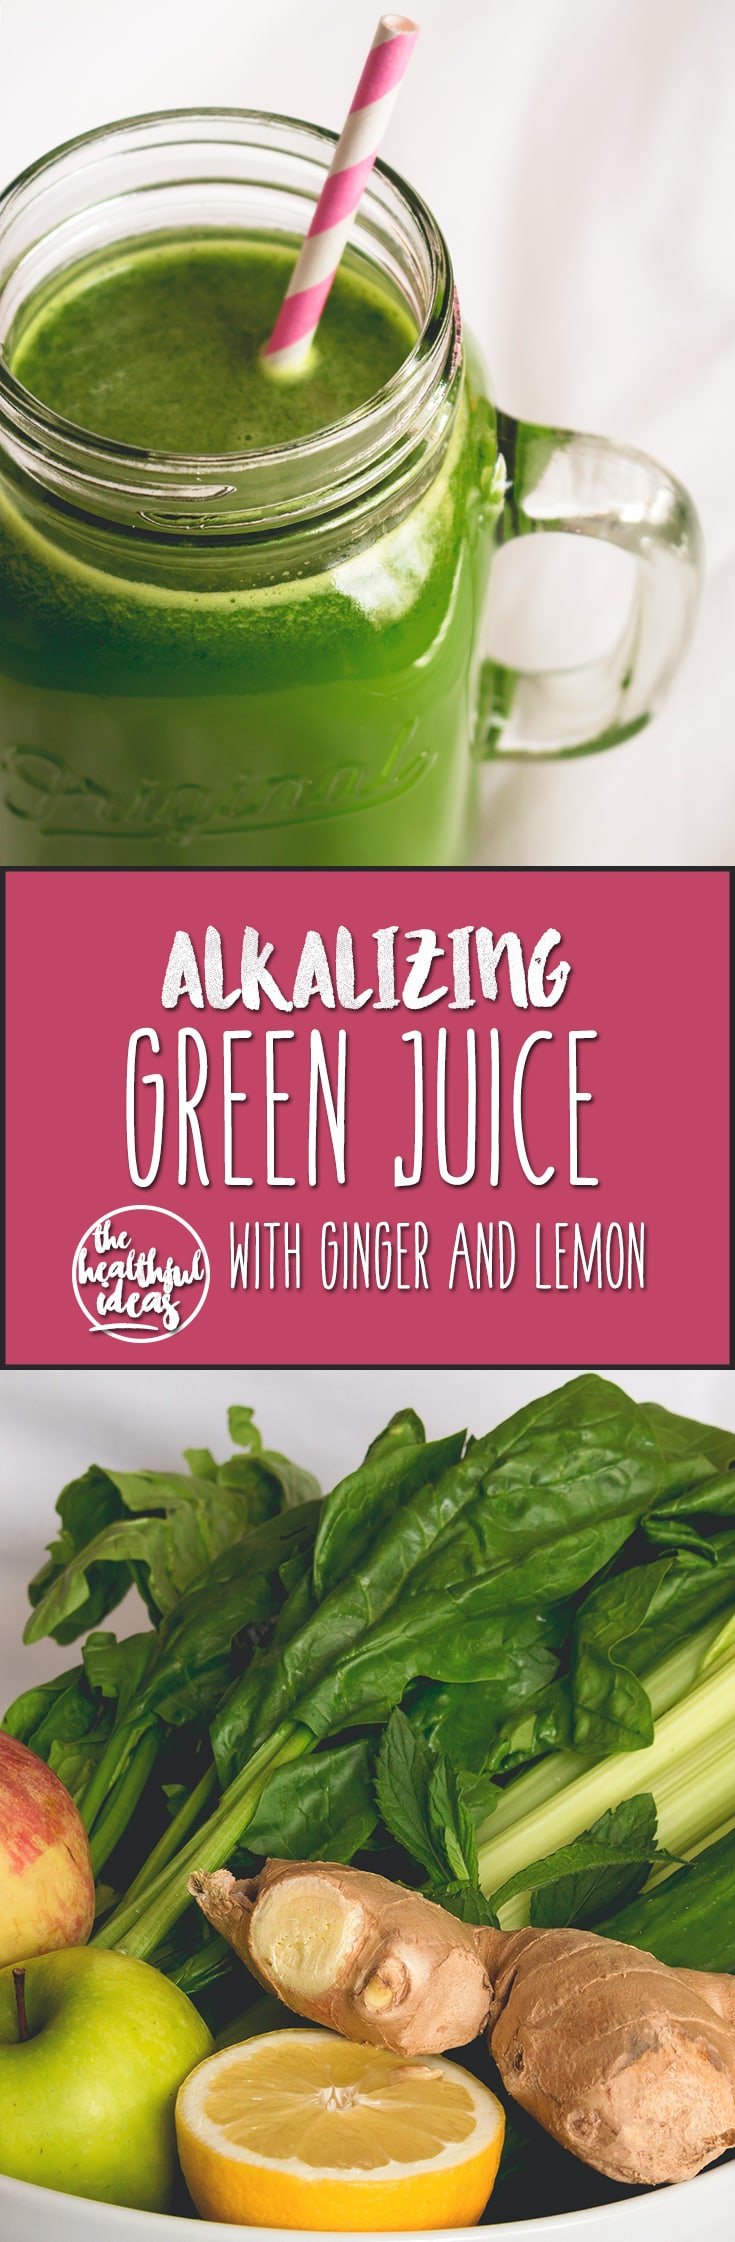 Green Juice with Ginger - delicious alkalizing green juice with ginger and lemon. Full of amazing vitamins and minerals your body craves! One green juice a day keeps the doctor away. I love this recipe! | thehealthfulideas.com